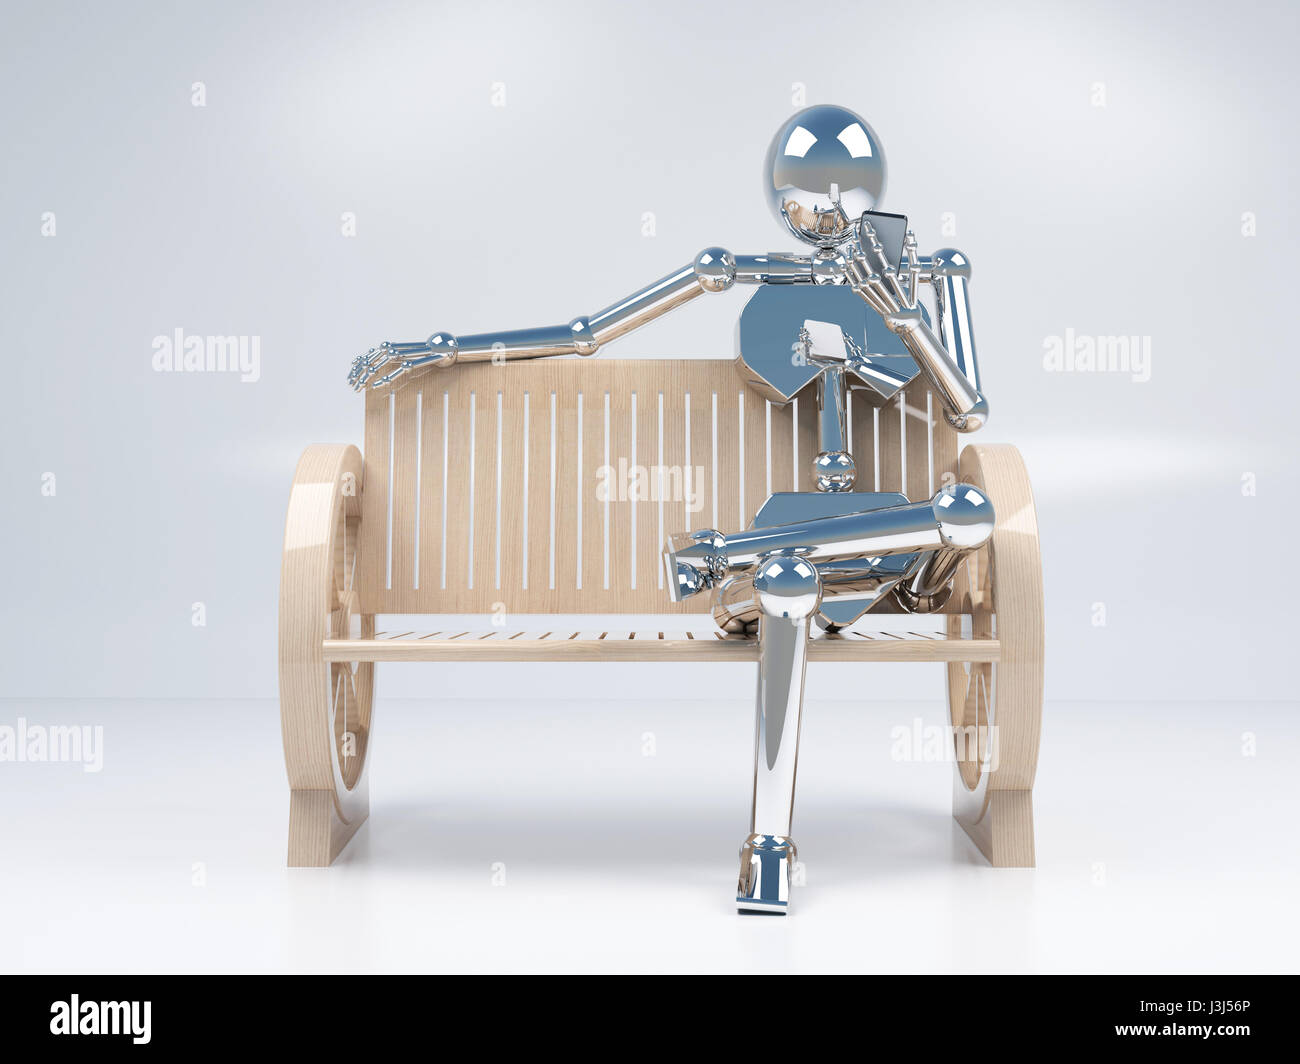 metal chrome robotic holding mobile phone in hand and sitting on the wood bench on white background Stock Photo